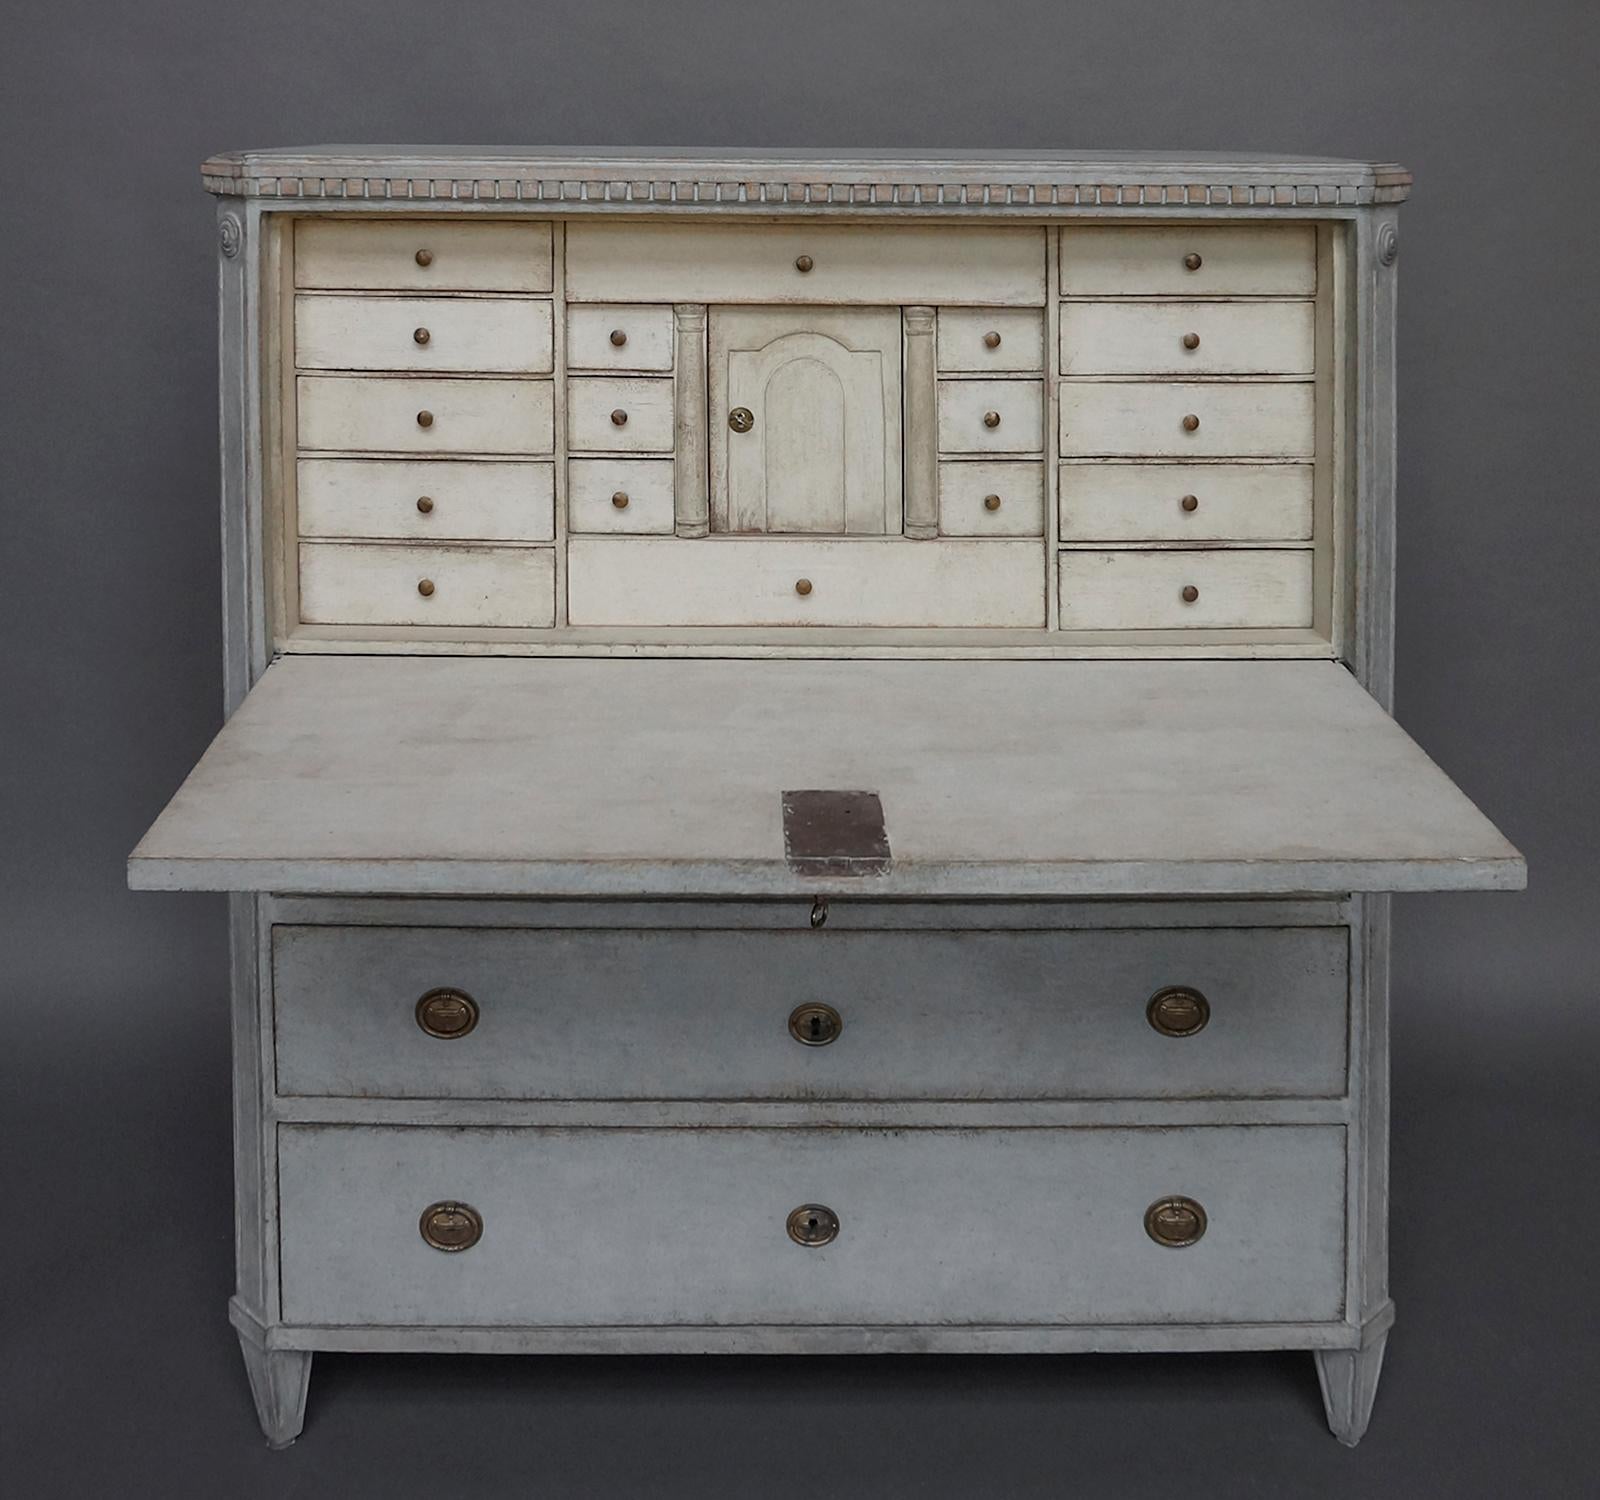 Swedish writing desk, circa 1820, with eighteen small drawers and a locking compartment in its fitted interior. Three full width drawers with molded brass pulls. Dentil molding around the top, canted corners, and tapering feet.